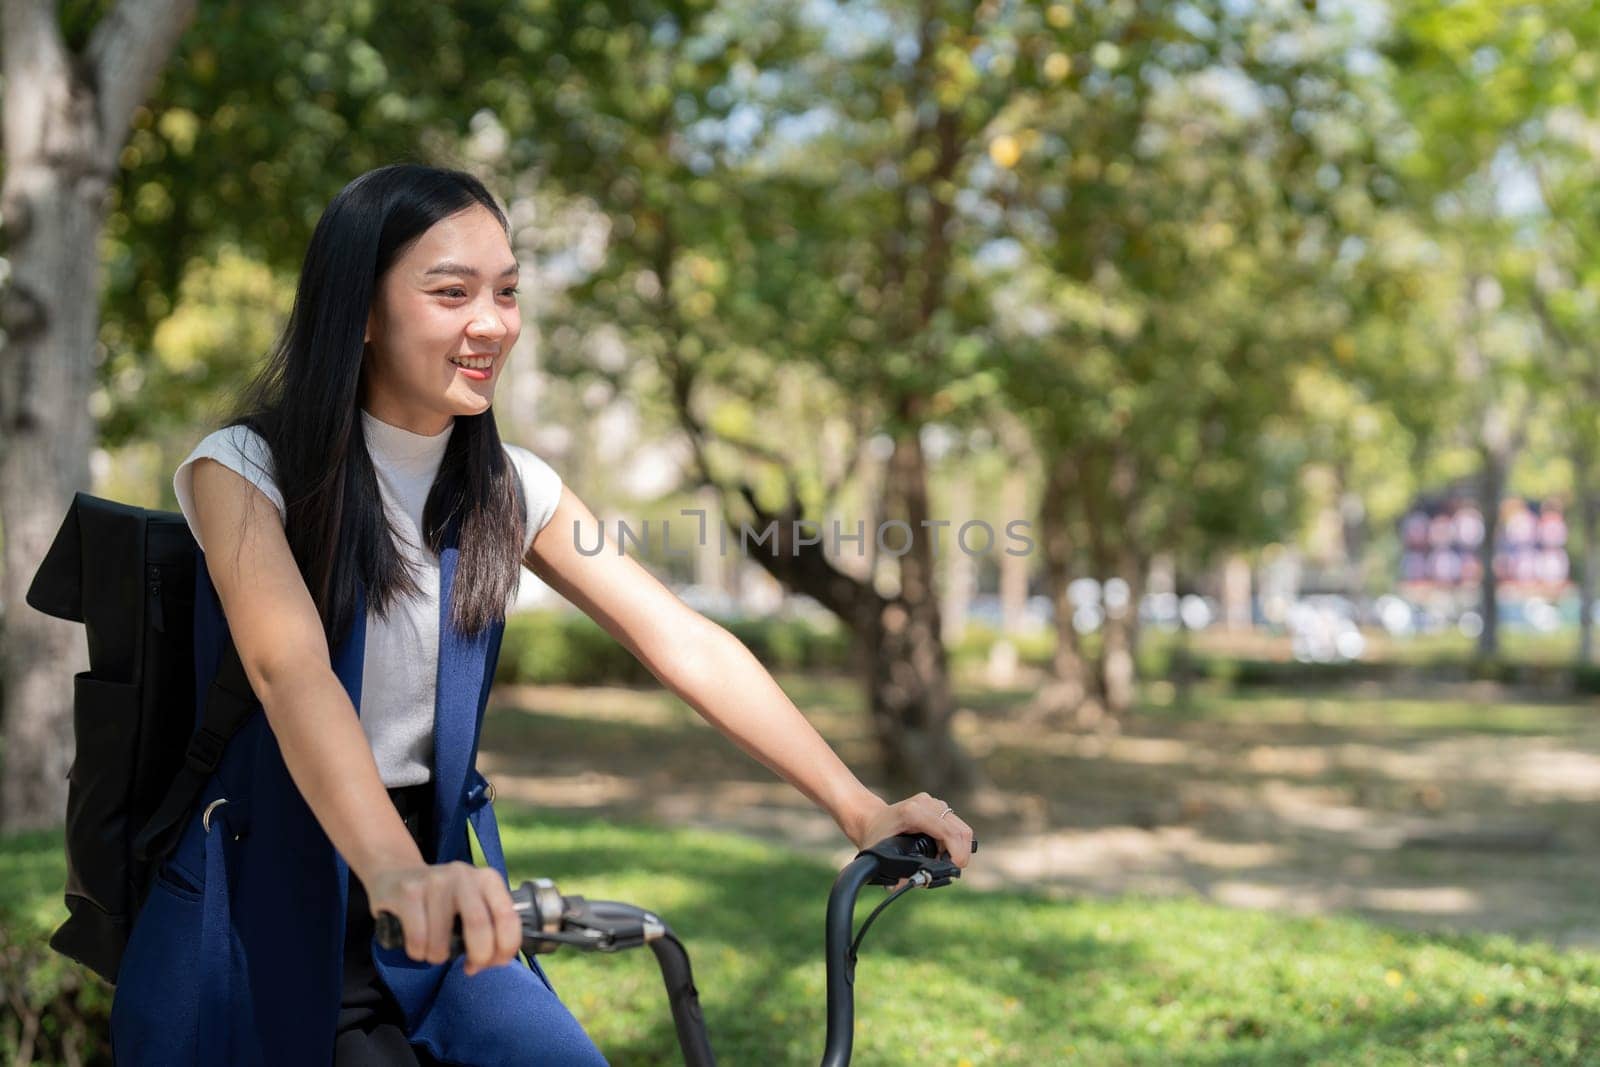 Eco friendly, Happy lifestyle asian beautiful young businesswoman riding bicycle go to office work at city street with bicycle in morning.